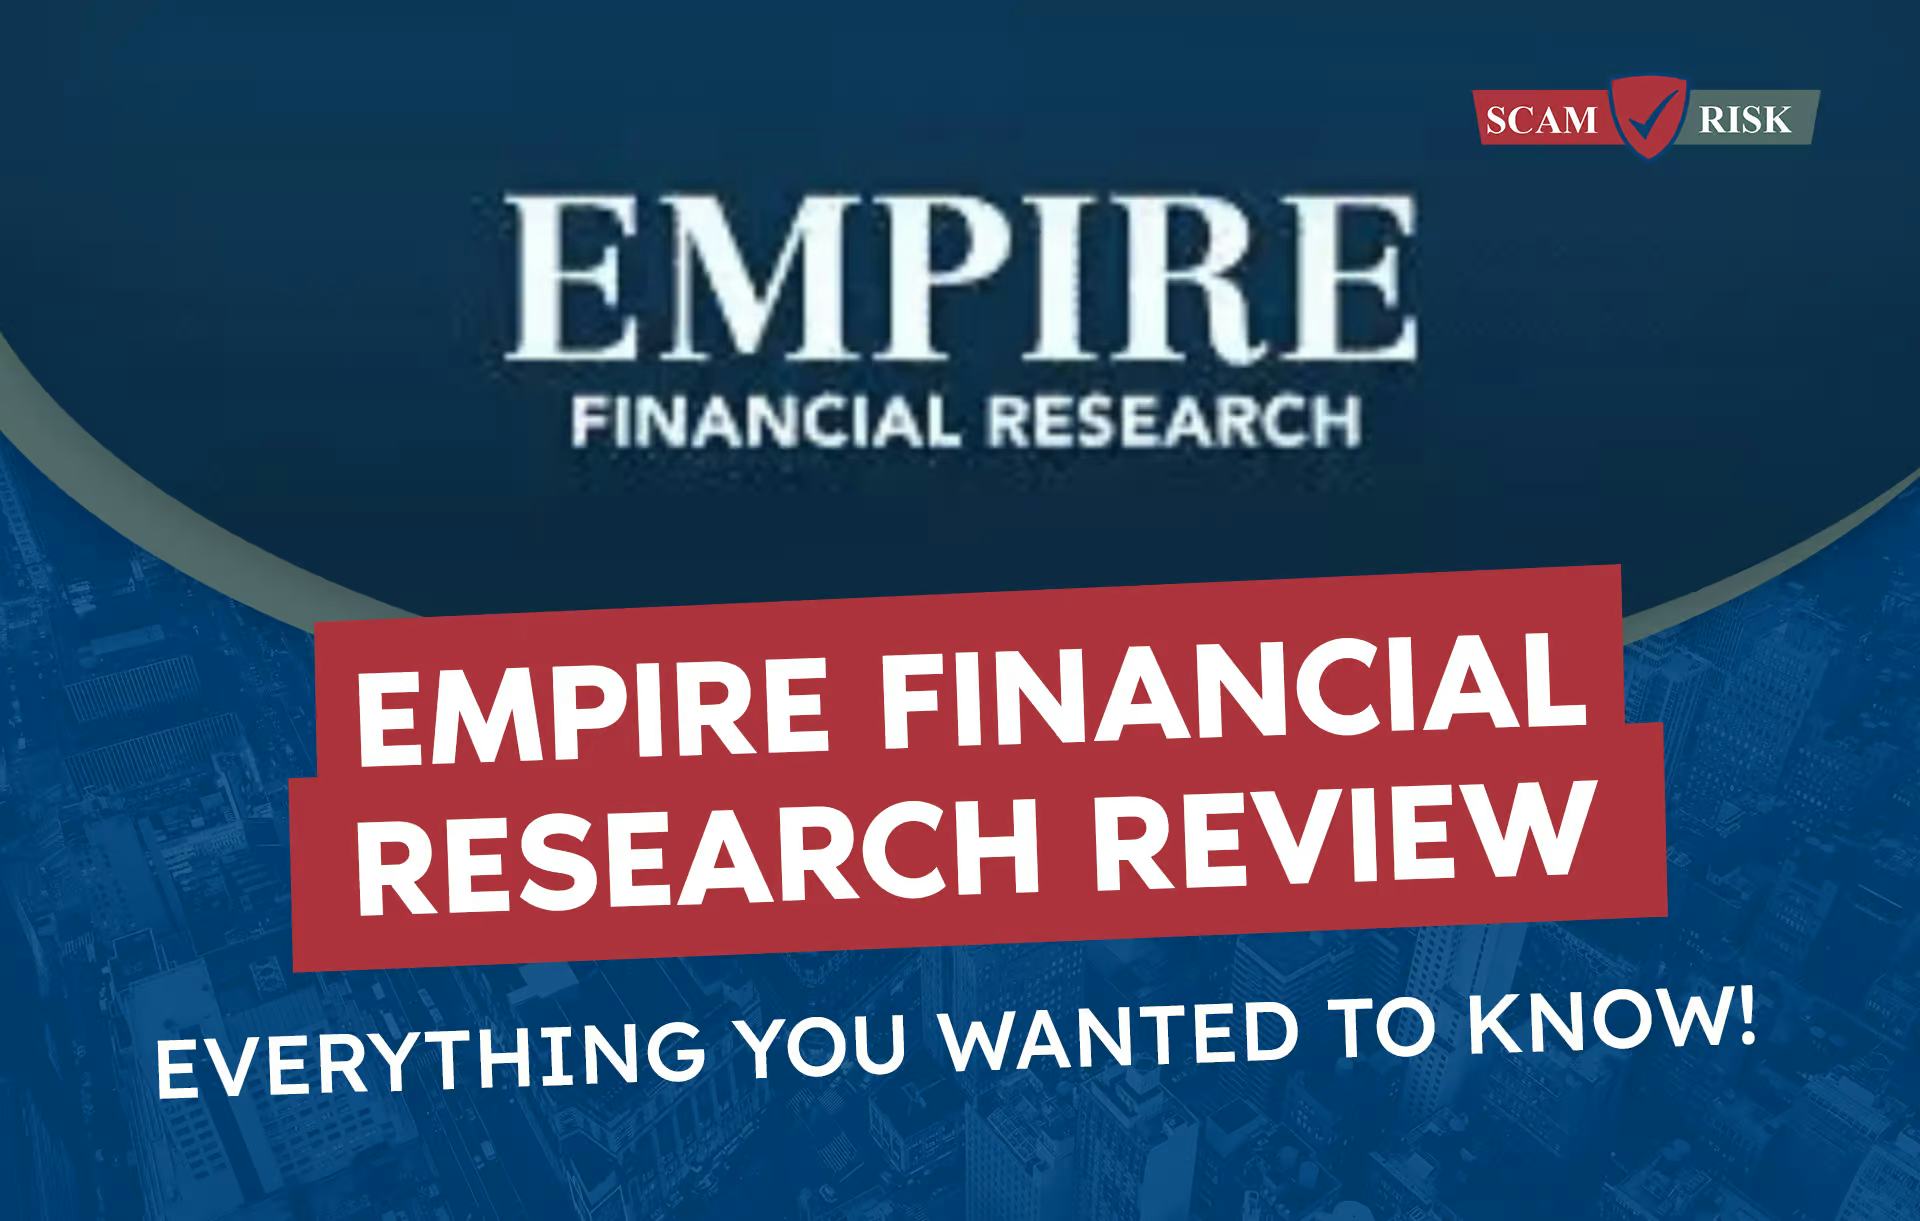 Empire Financial Research Reviews: Everything You Wanted To Know!